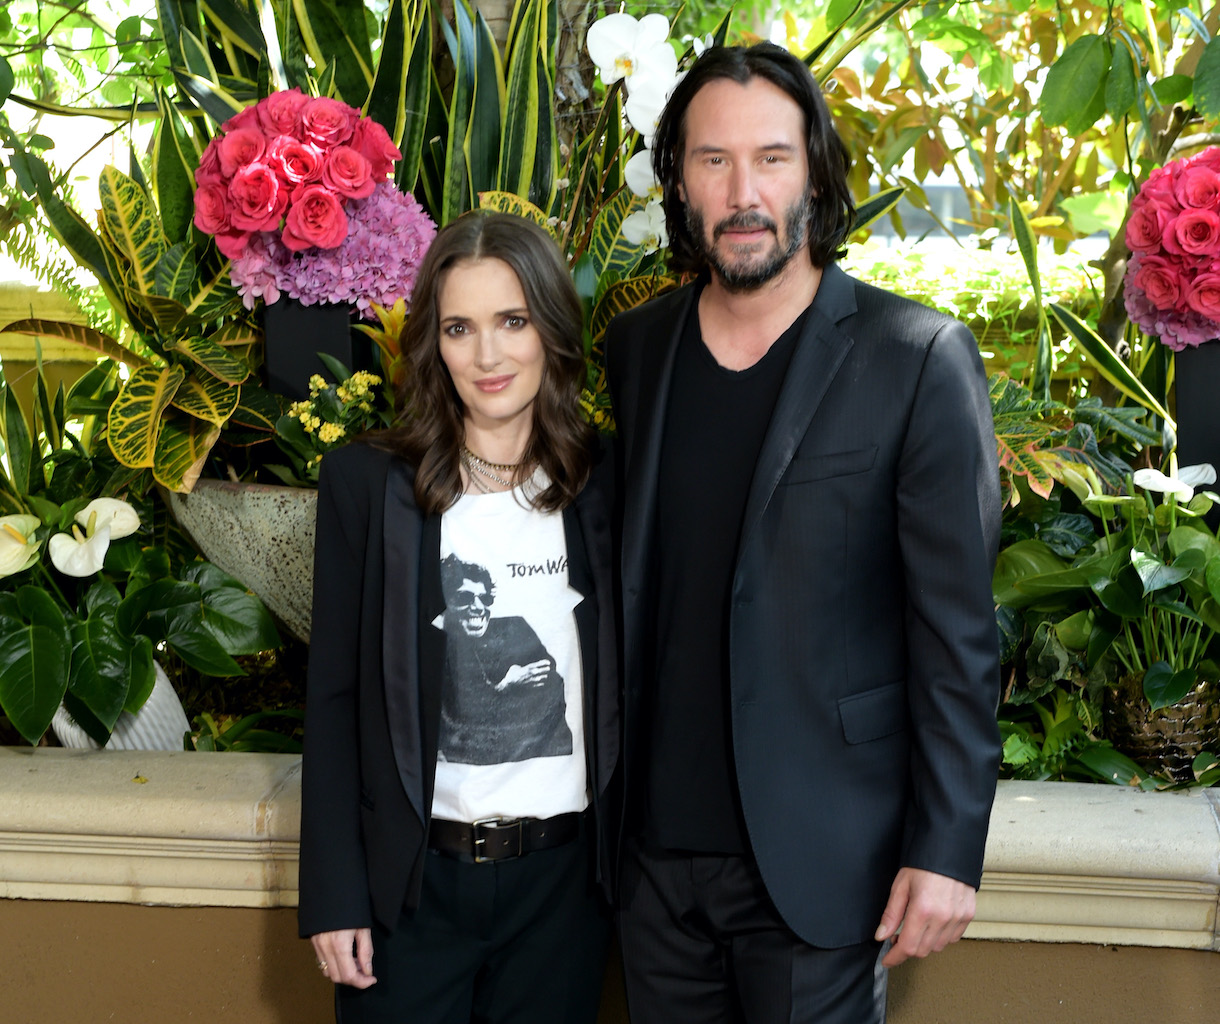 Winona Ryder and Keanu Reeves attend a photo call for Regatta's 'Destination Wedding' at the Four Seasons Hotel in Los Angeles